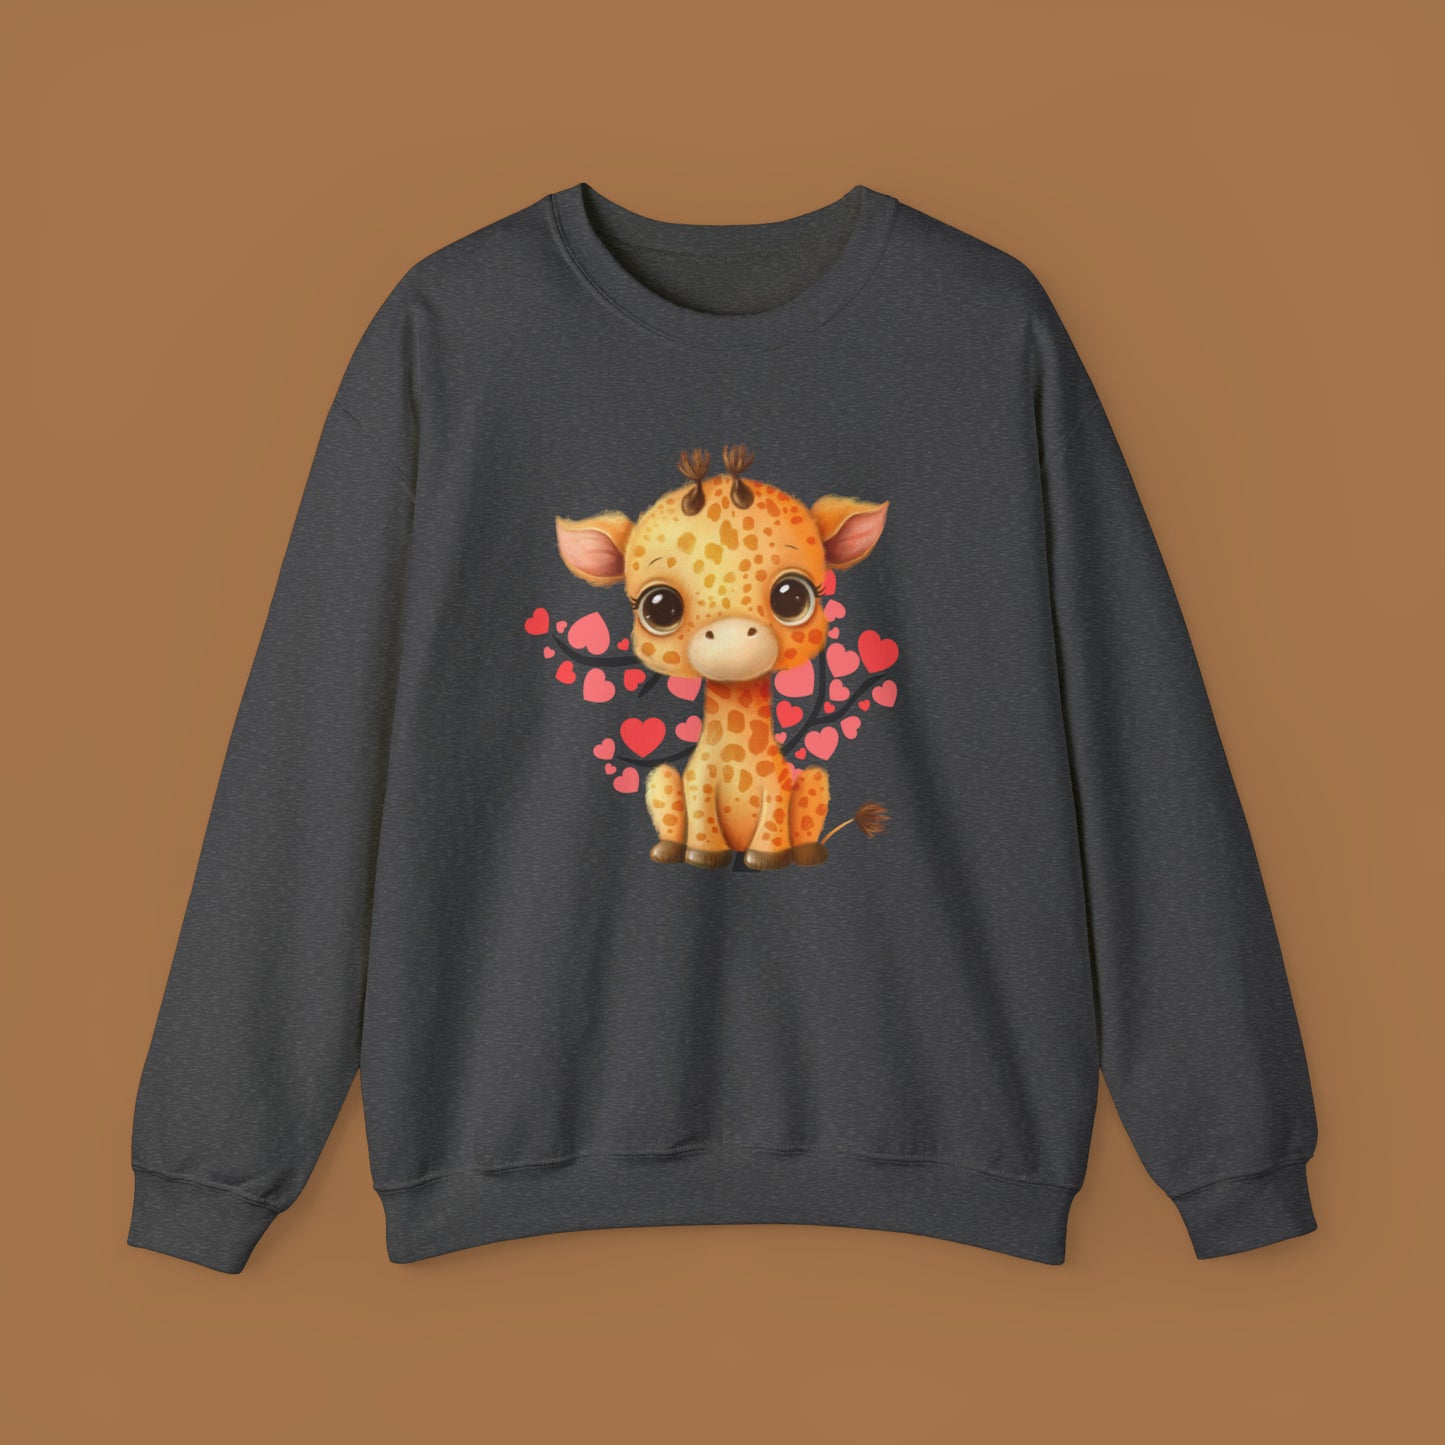 Love giraffes? Here’s the sweatshirt for you! Give the gift of this Unisex Heavy Blend™ Crewneck Sweatshirt or get one for yourself.